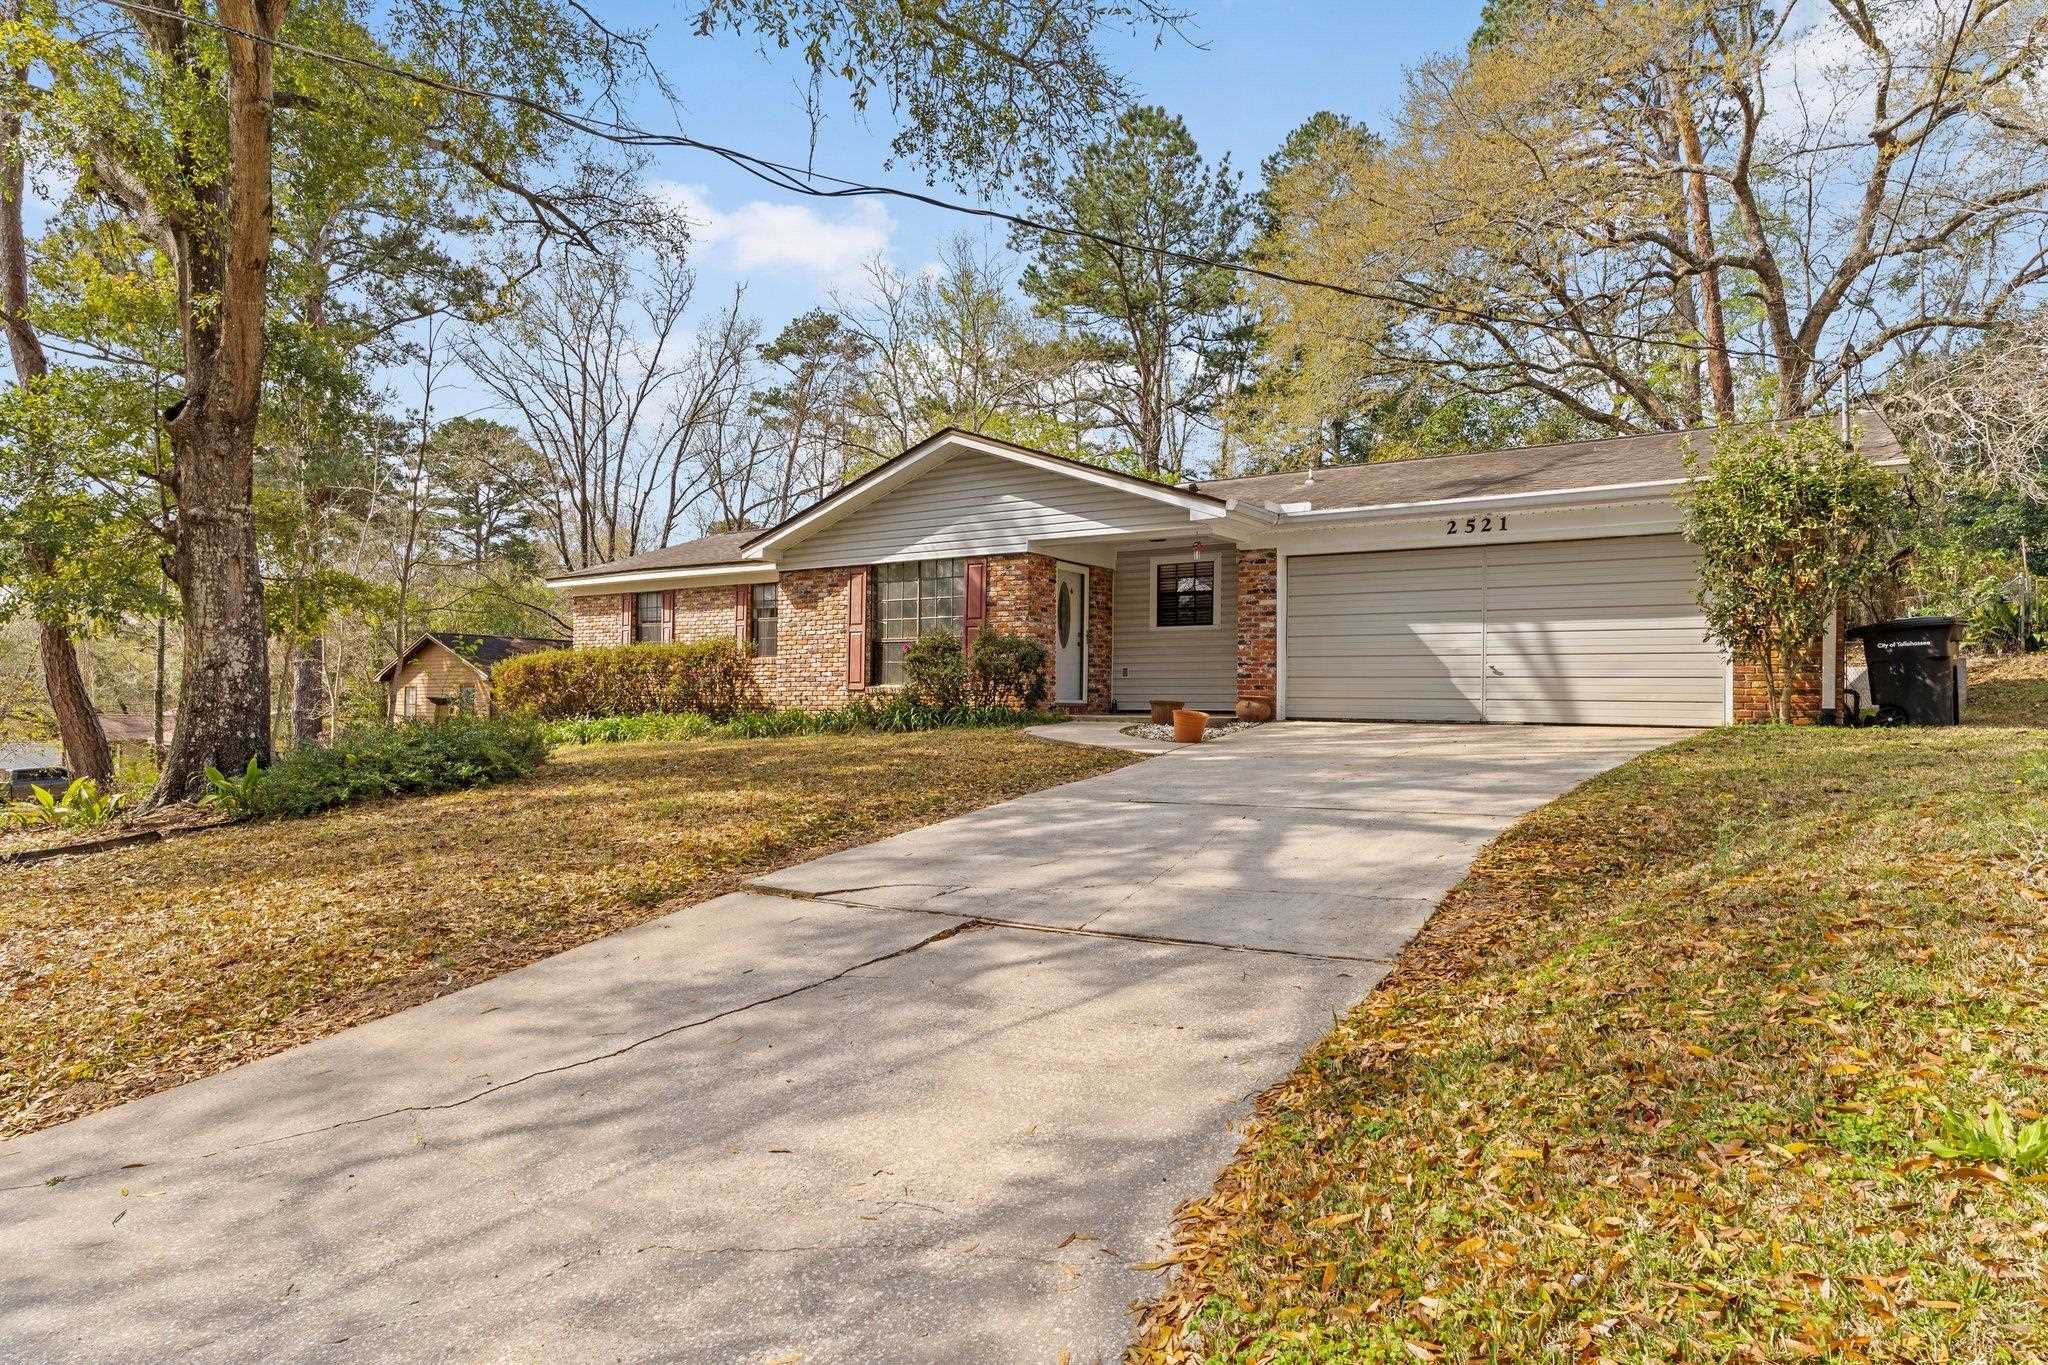 2521 WHISPER Way,TALLAHASSEE,Florida 32308,3 Bedrooms Bedrooms,2 BathroomsBathrooms,Detached single family,2521 WHISPER Way,369168